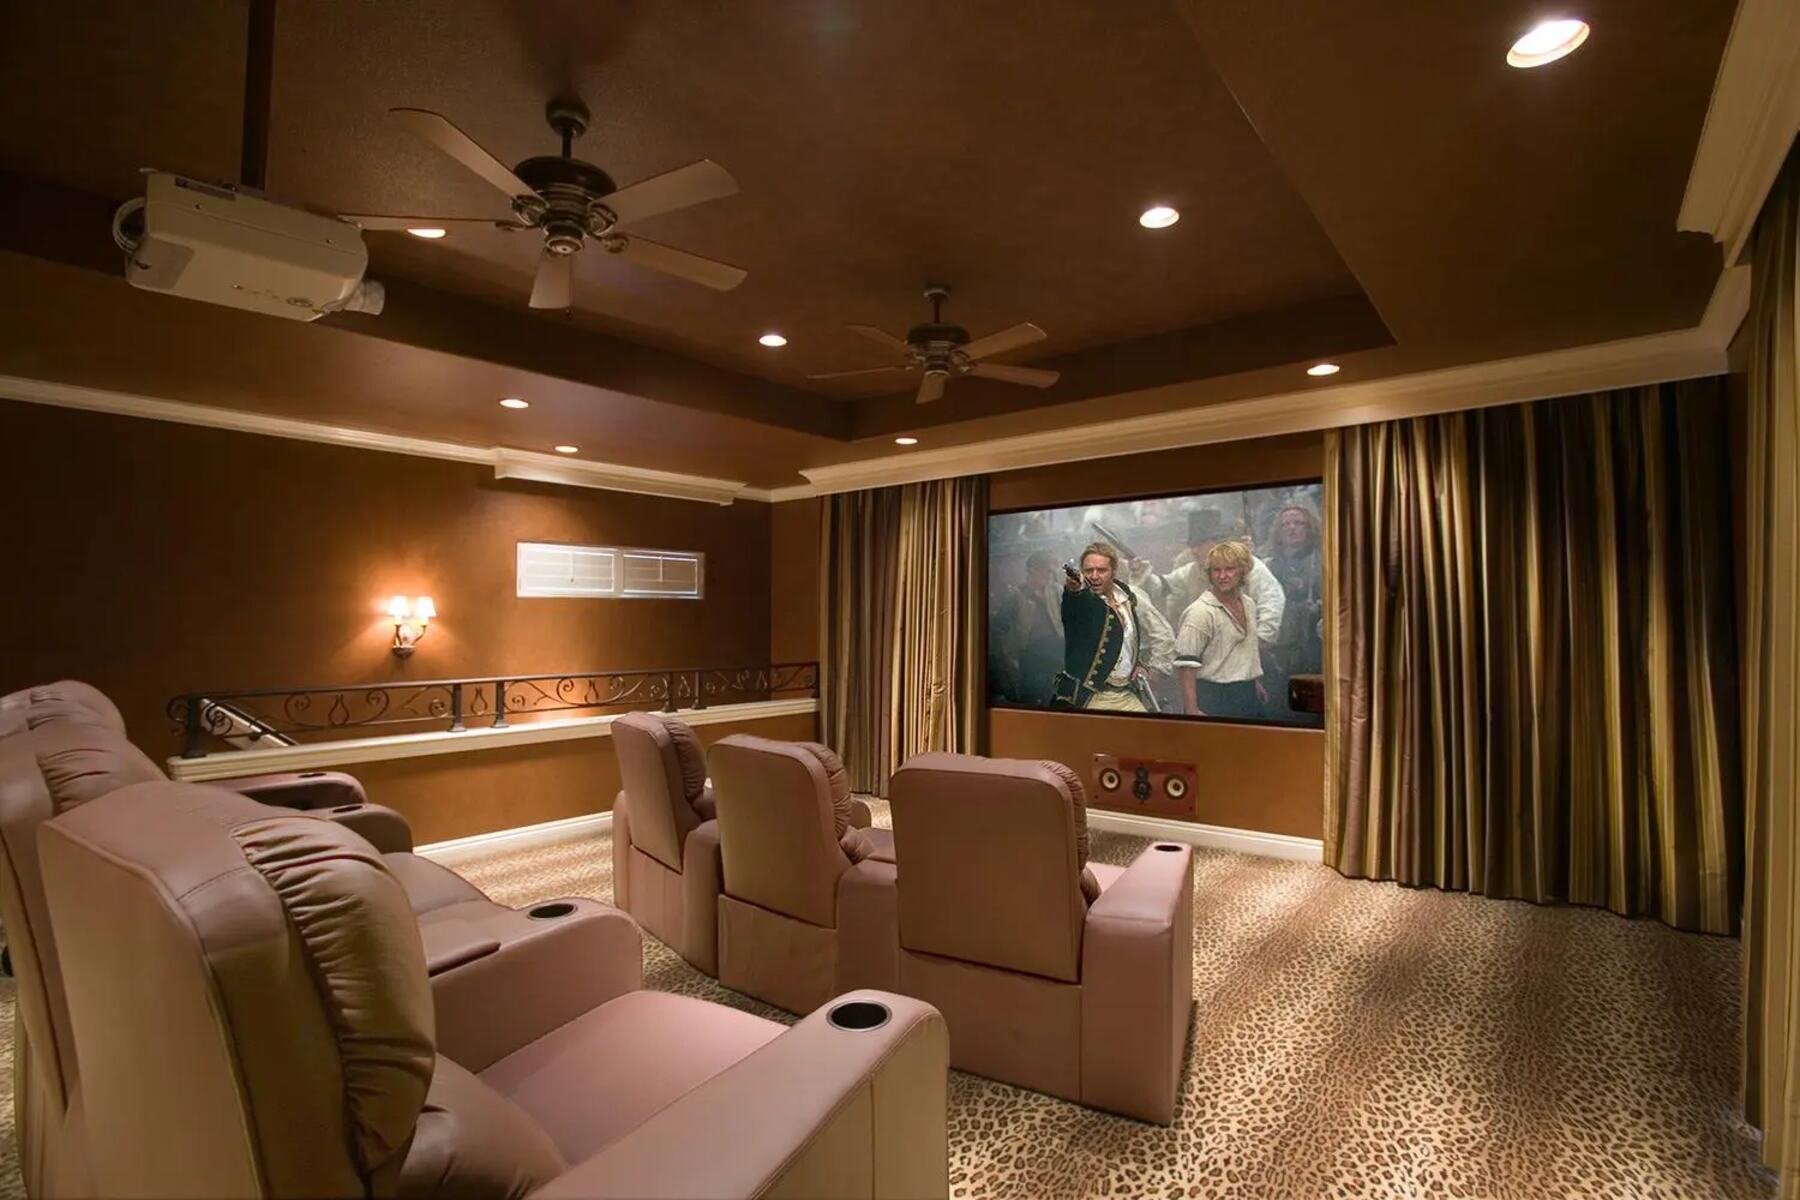 How To Choose A Projector For Home Entertainment